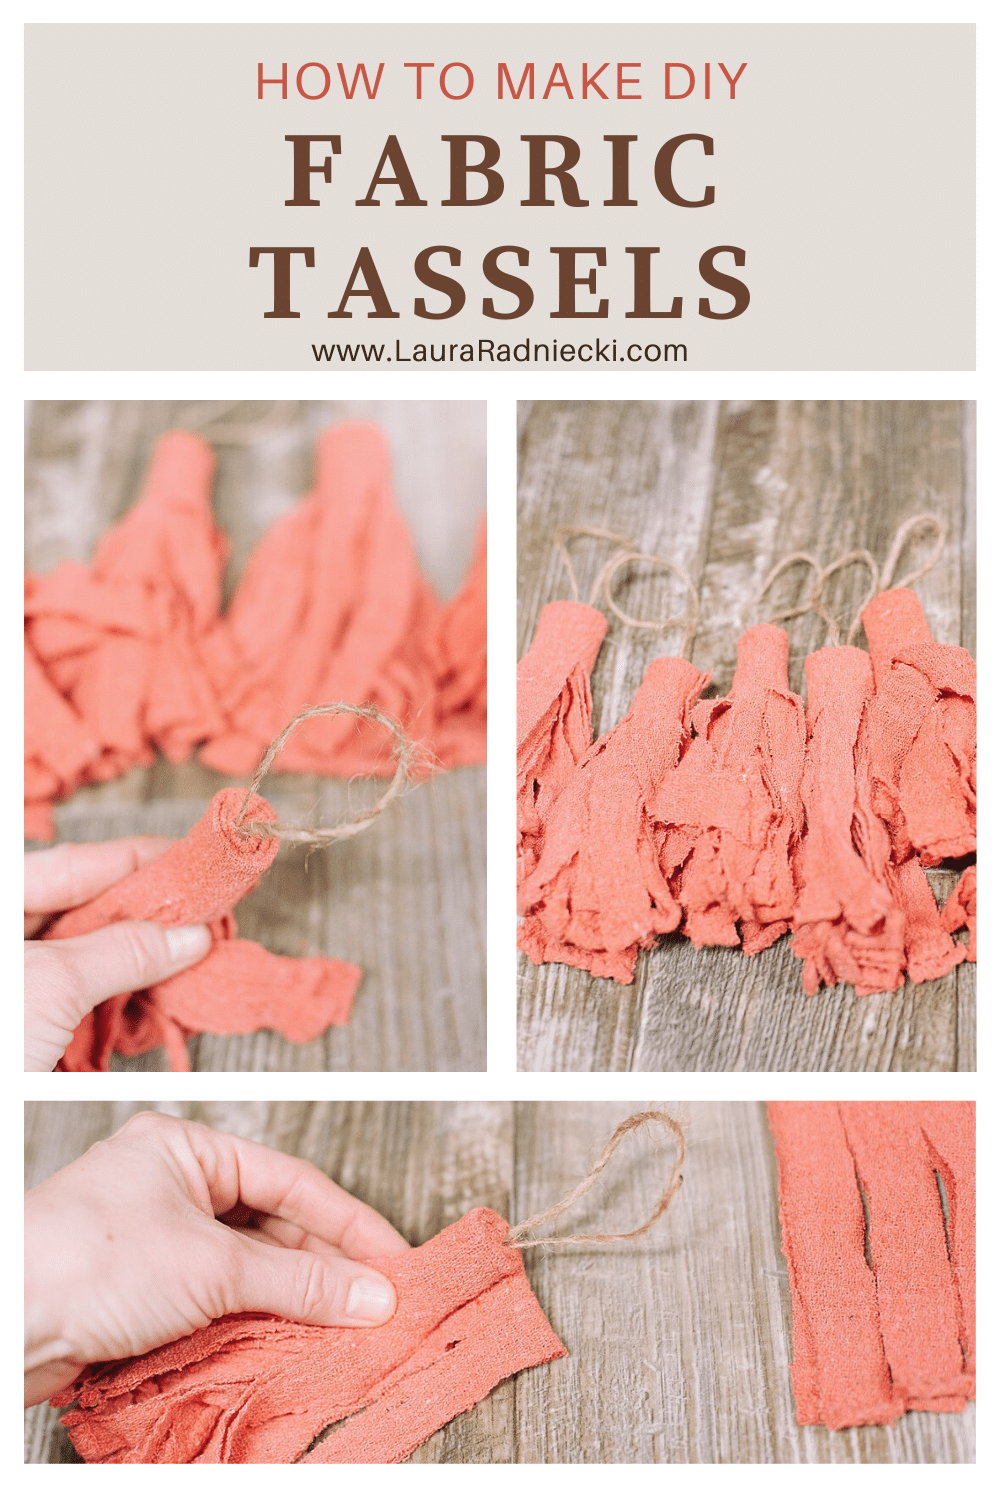 How to Make DIY Fabric Tassels with Shop Towels from the Dollar Tree